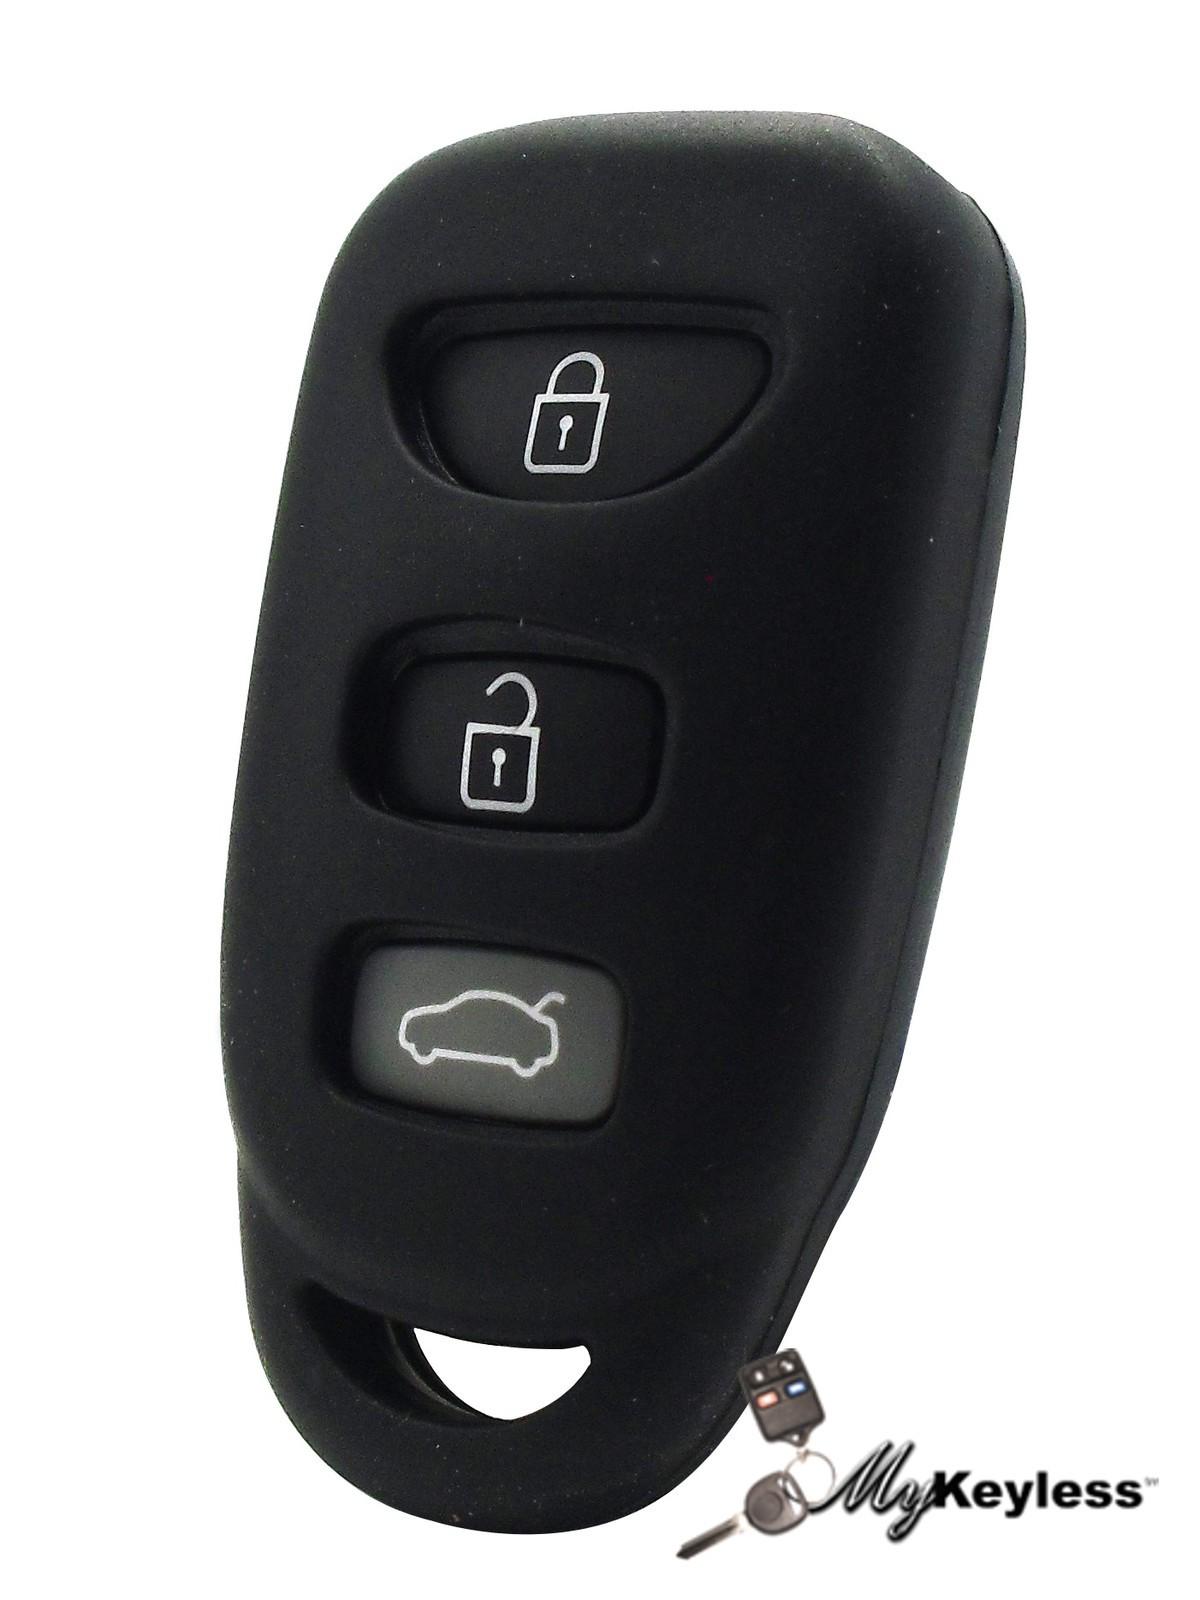 New hyundai replacement keyless entry car remote key fob + protective jacket